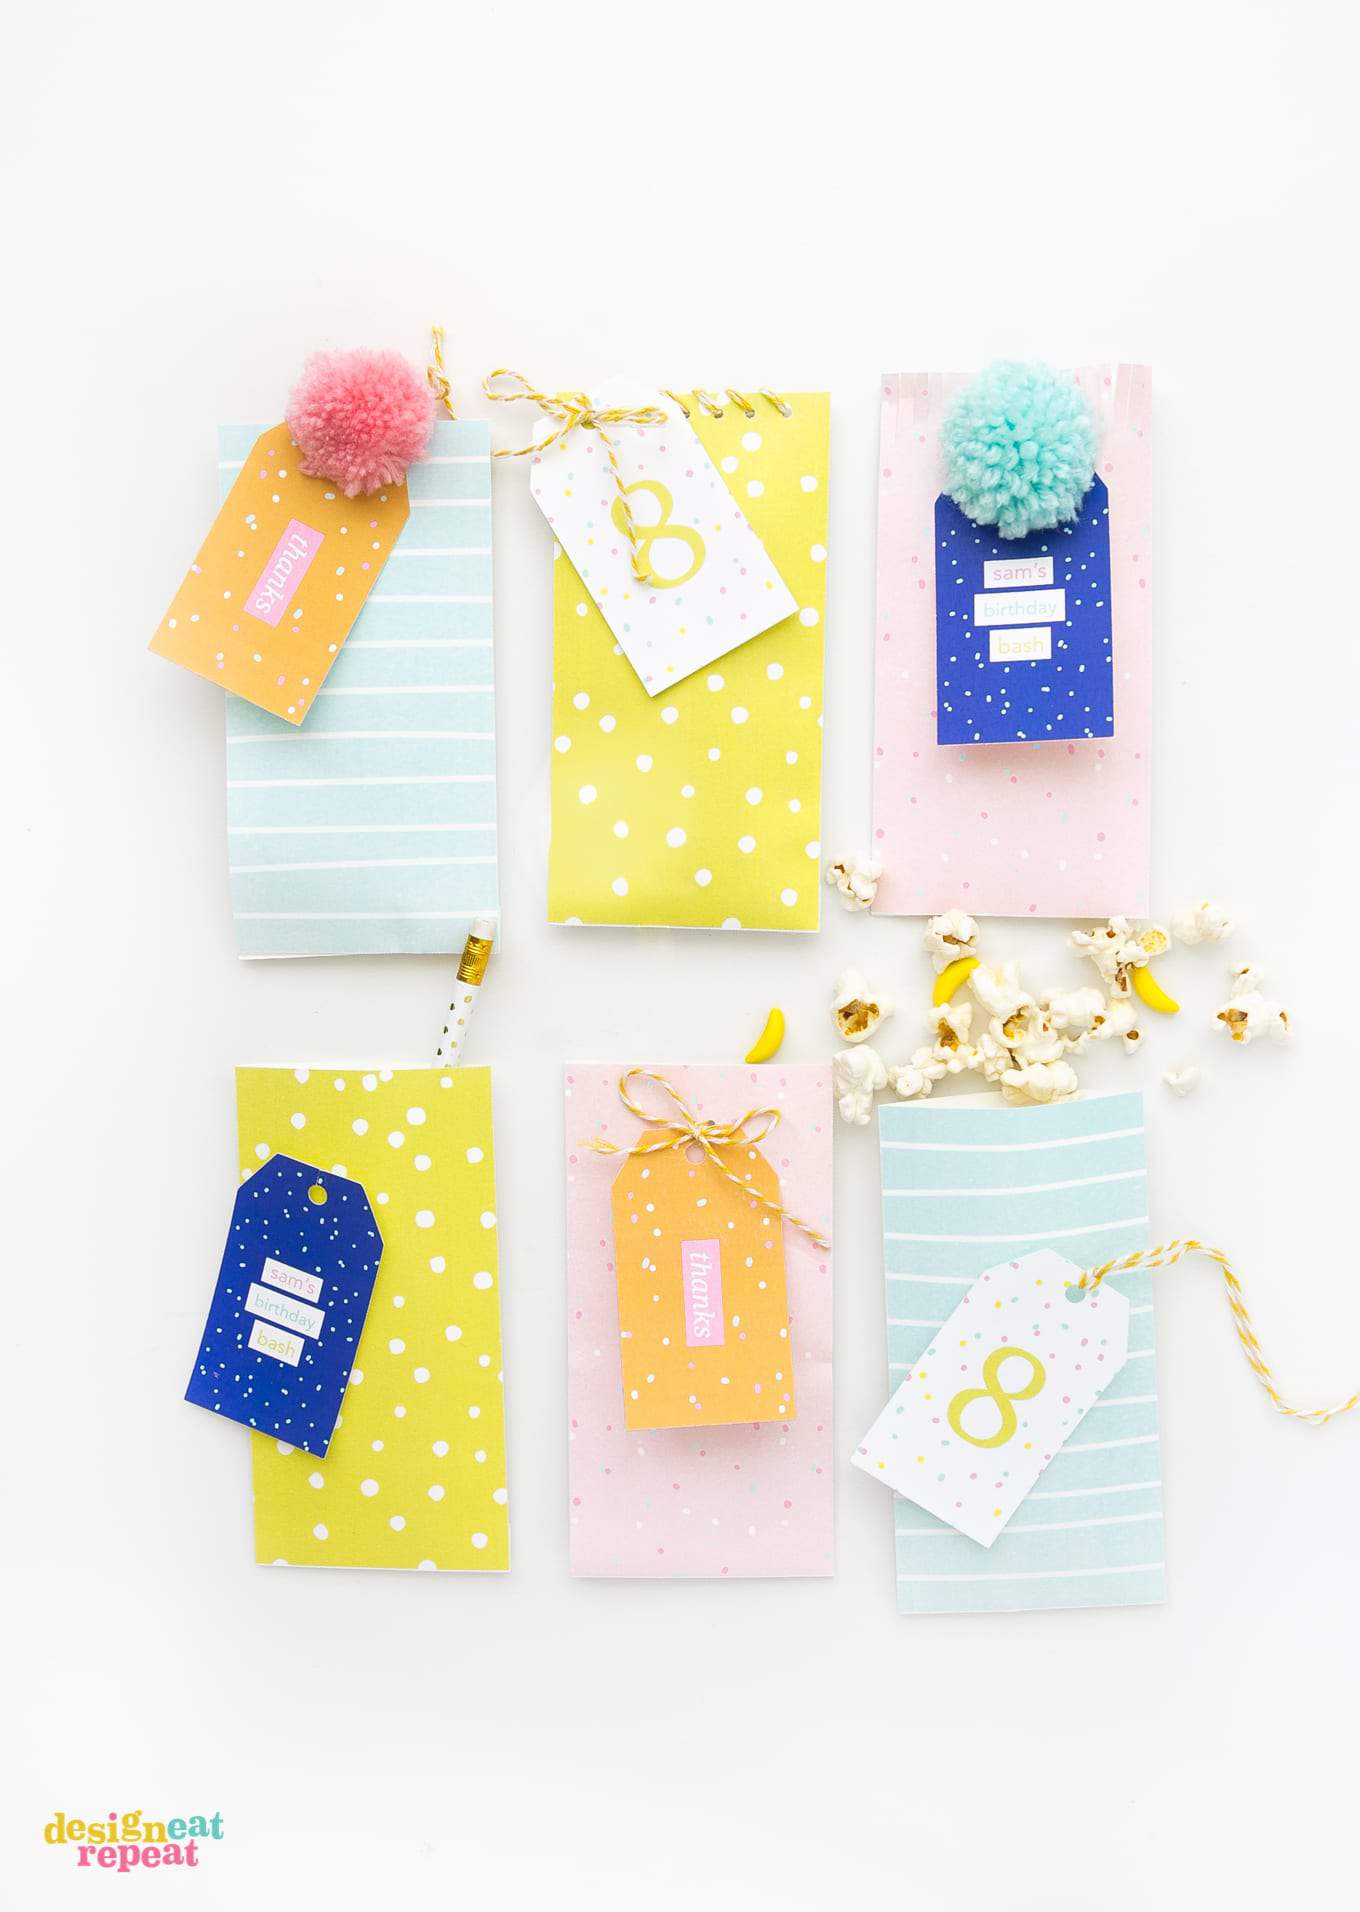 Download these printable party favor bags and fill with candy & trinkets for the perfect birthday party favor or envelope!